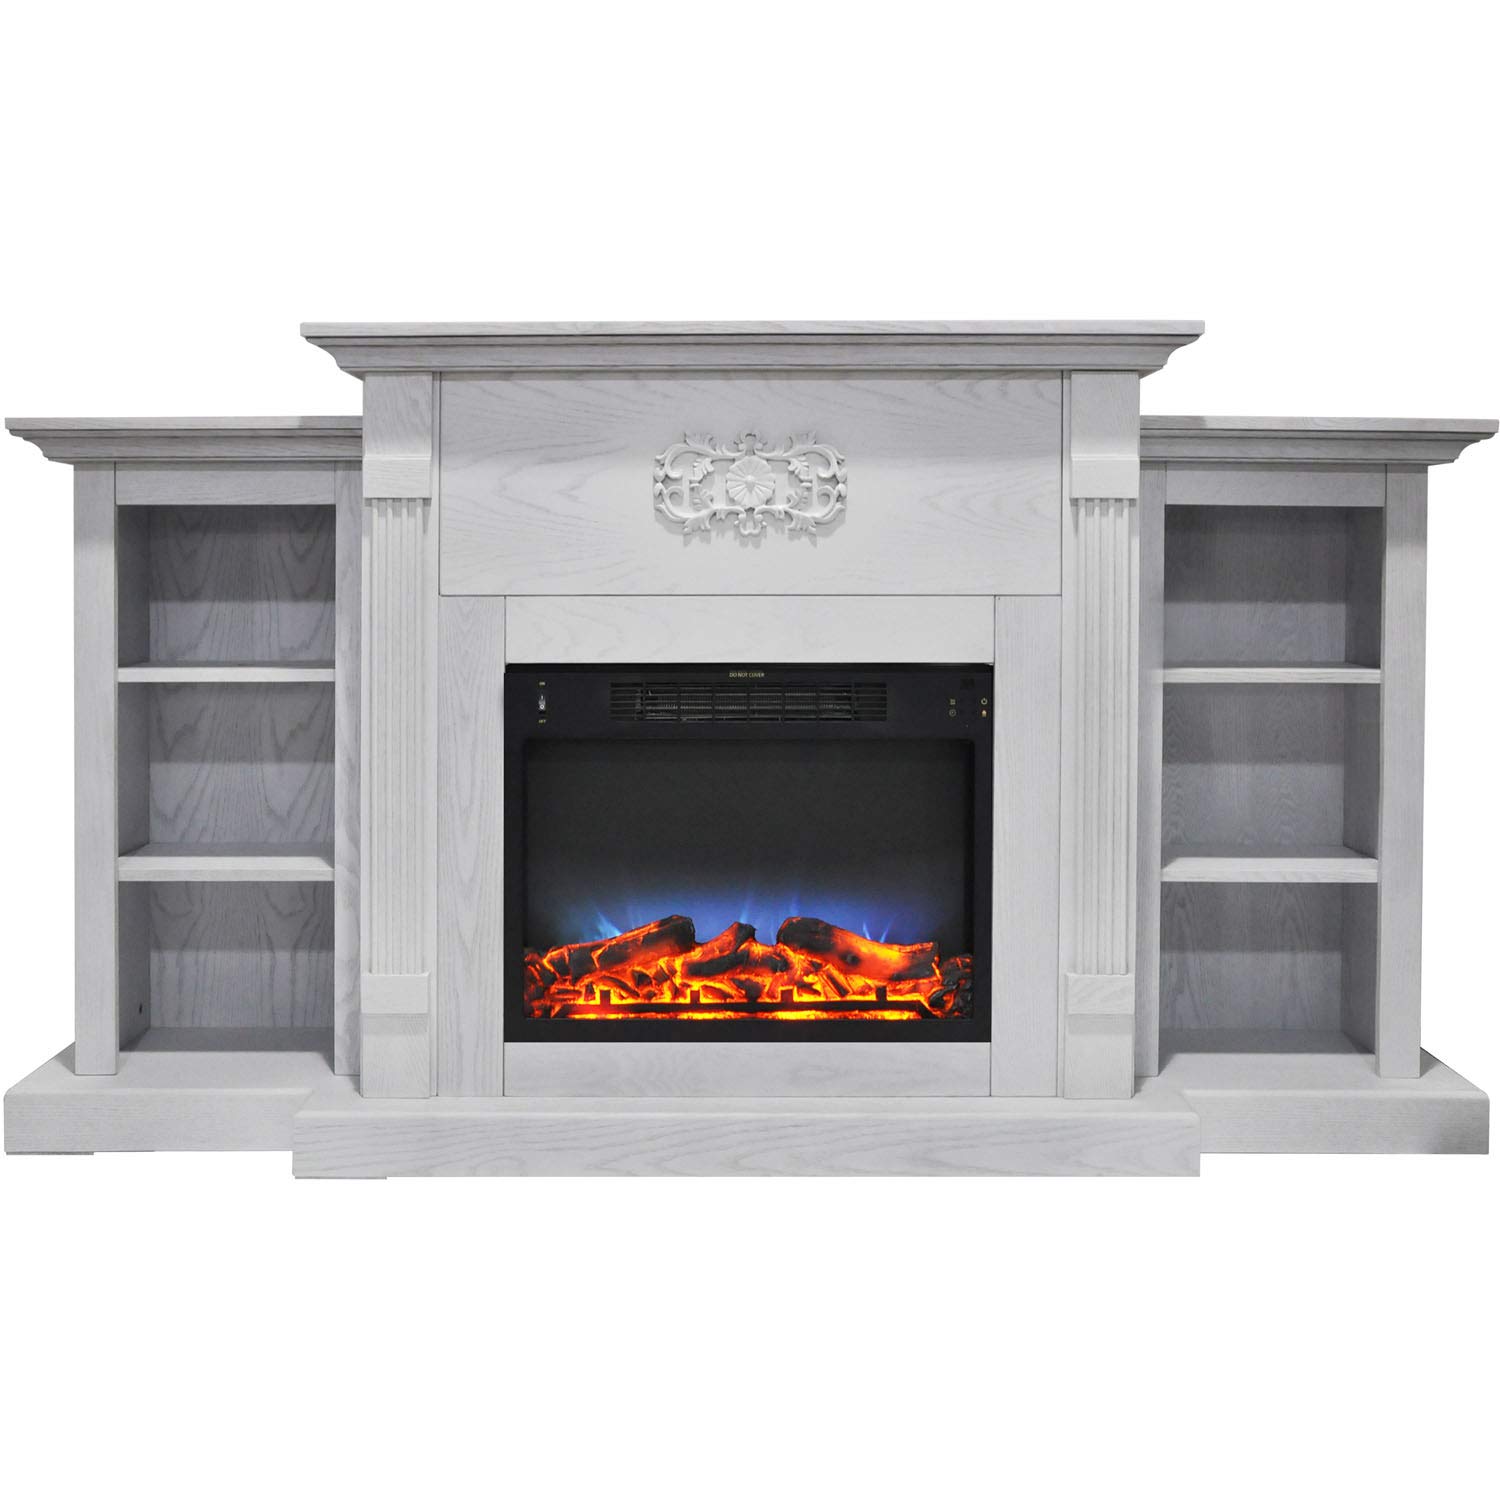 Hanover 72'' Classic White Electric Fireplace with Log Display and LED Multi-Color Realistic Flames, Modern TV Stand Fireplace Heater for Home, Office with Remote Control and Built-in Bookshelves